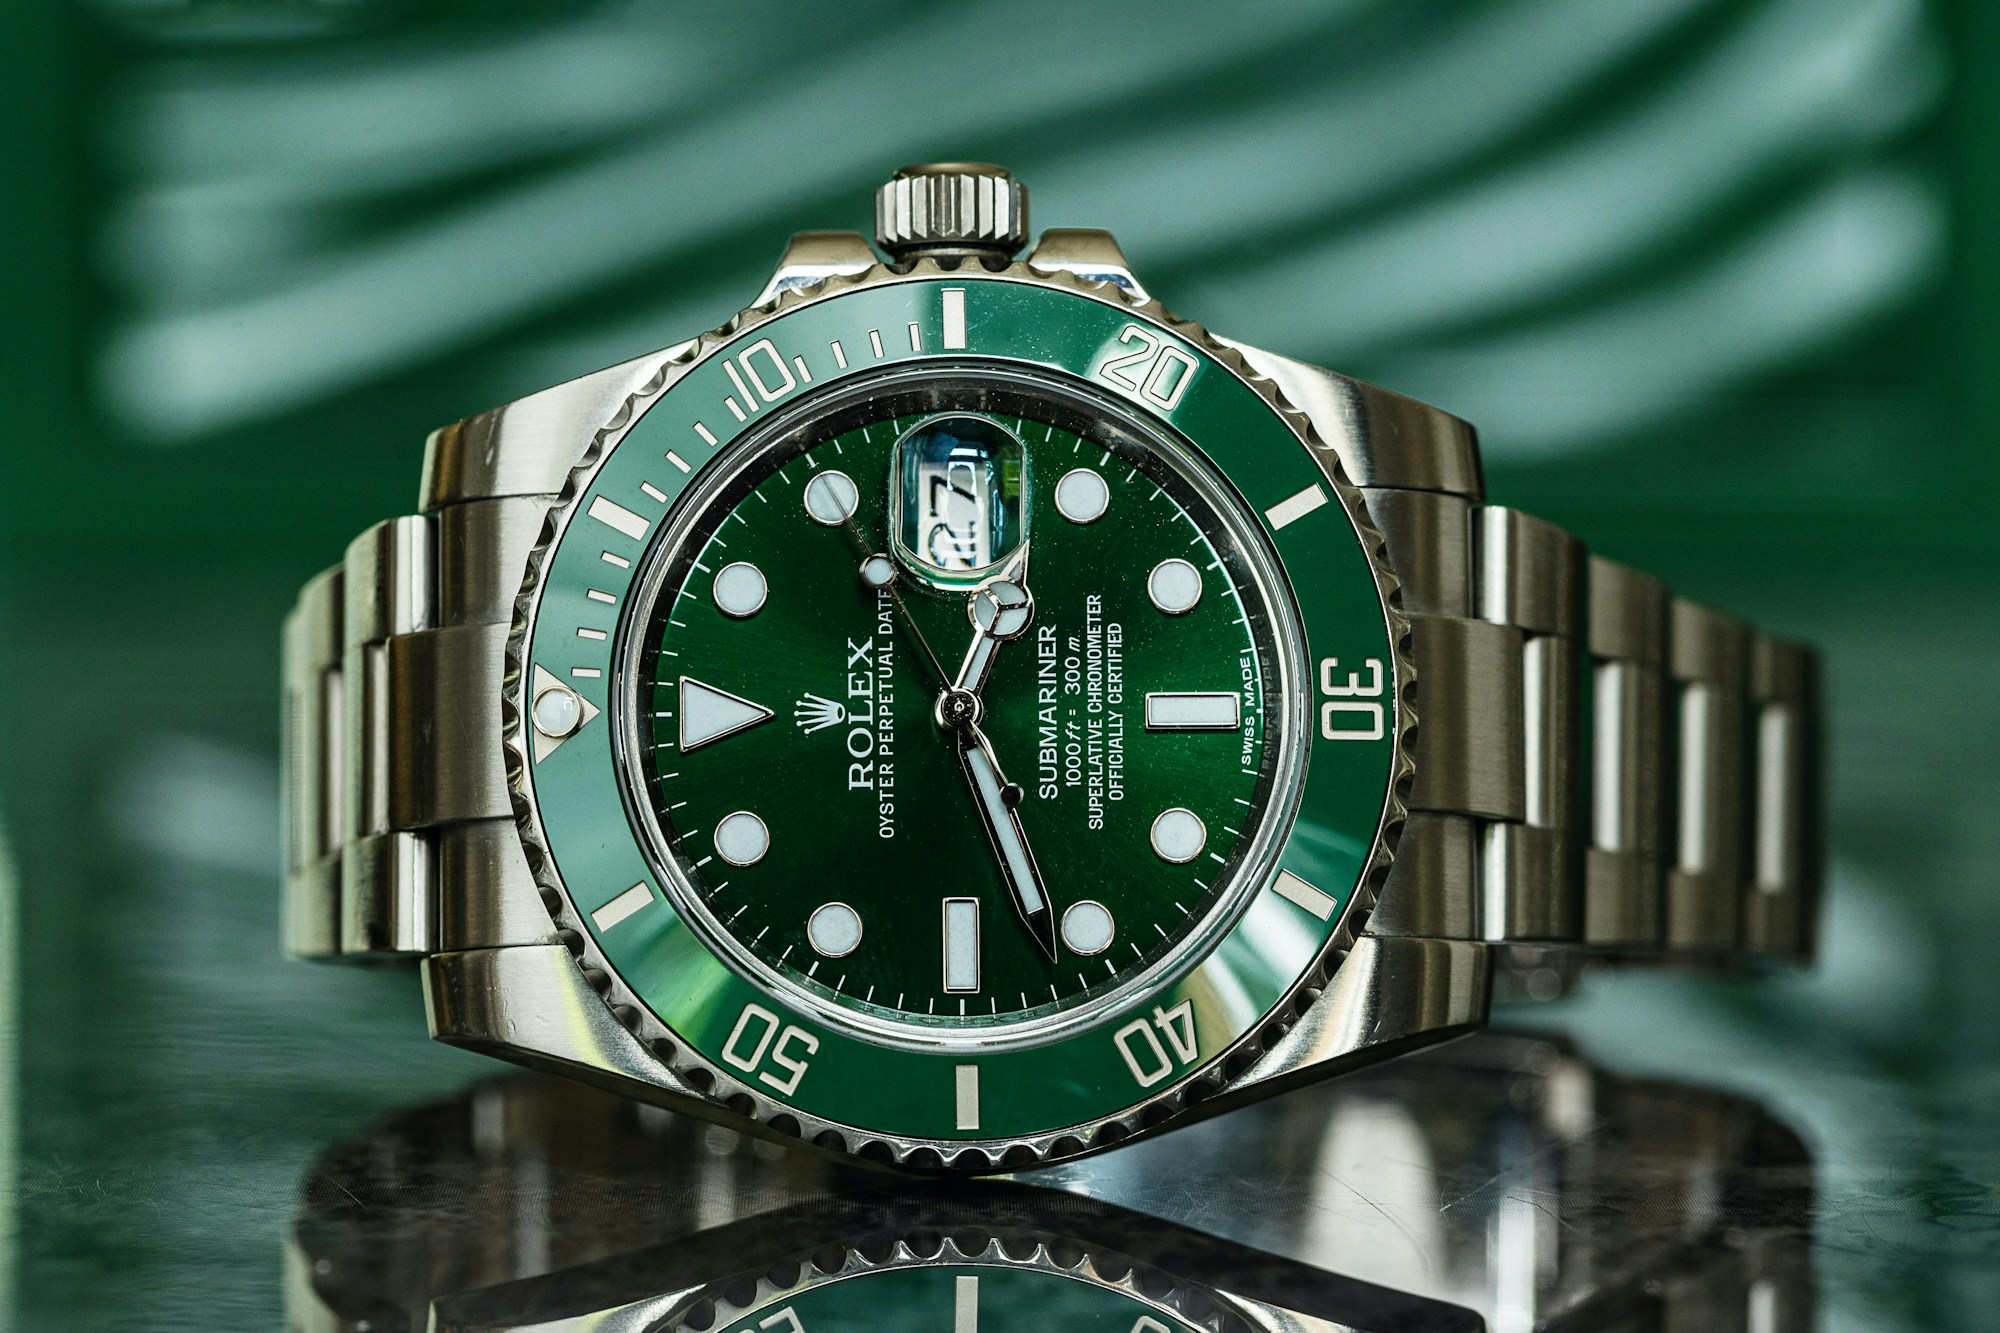 2014 ROLEX SUBMARINER 'HULK' for sale by auction in London, United Kingdom